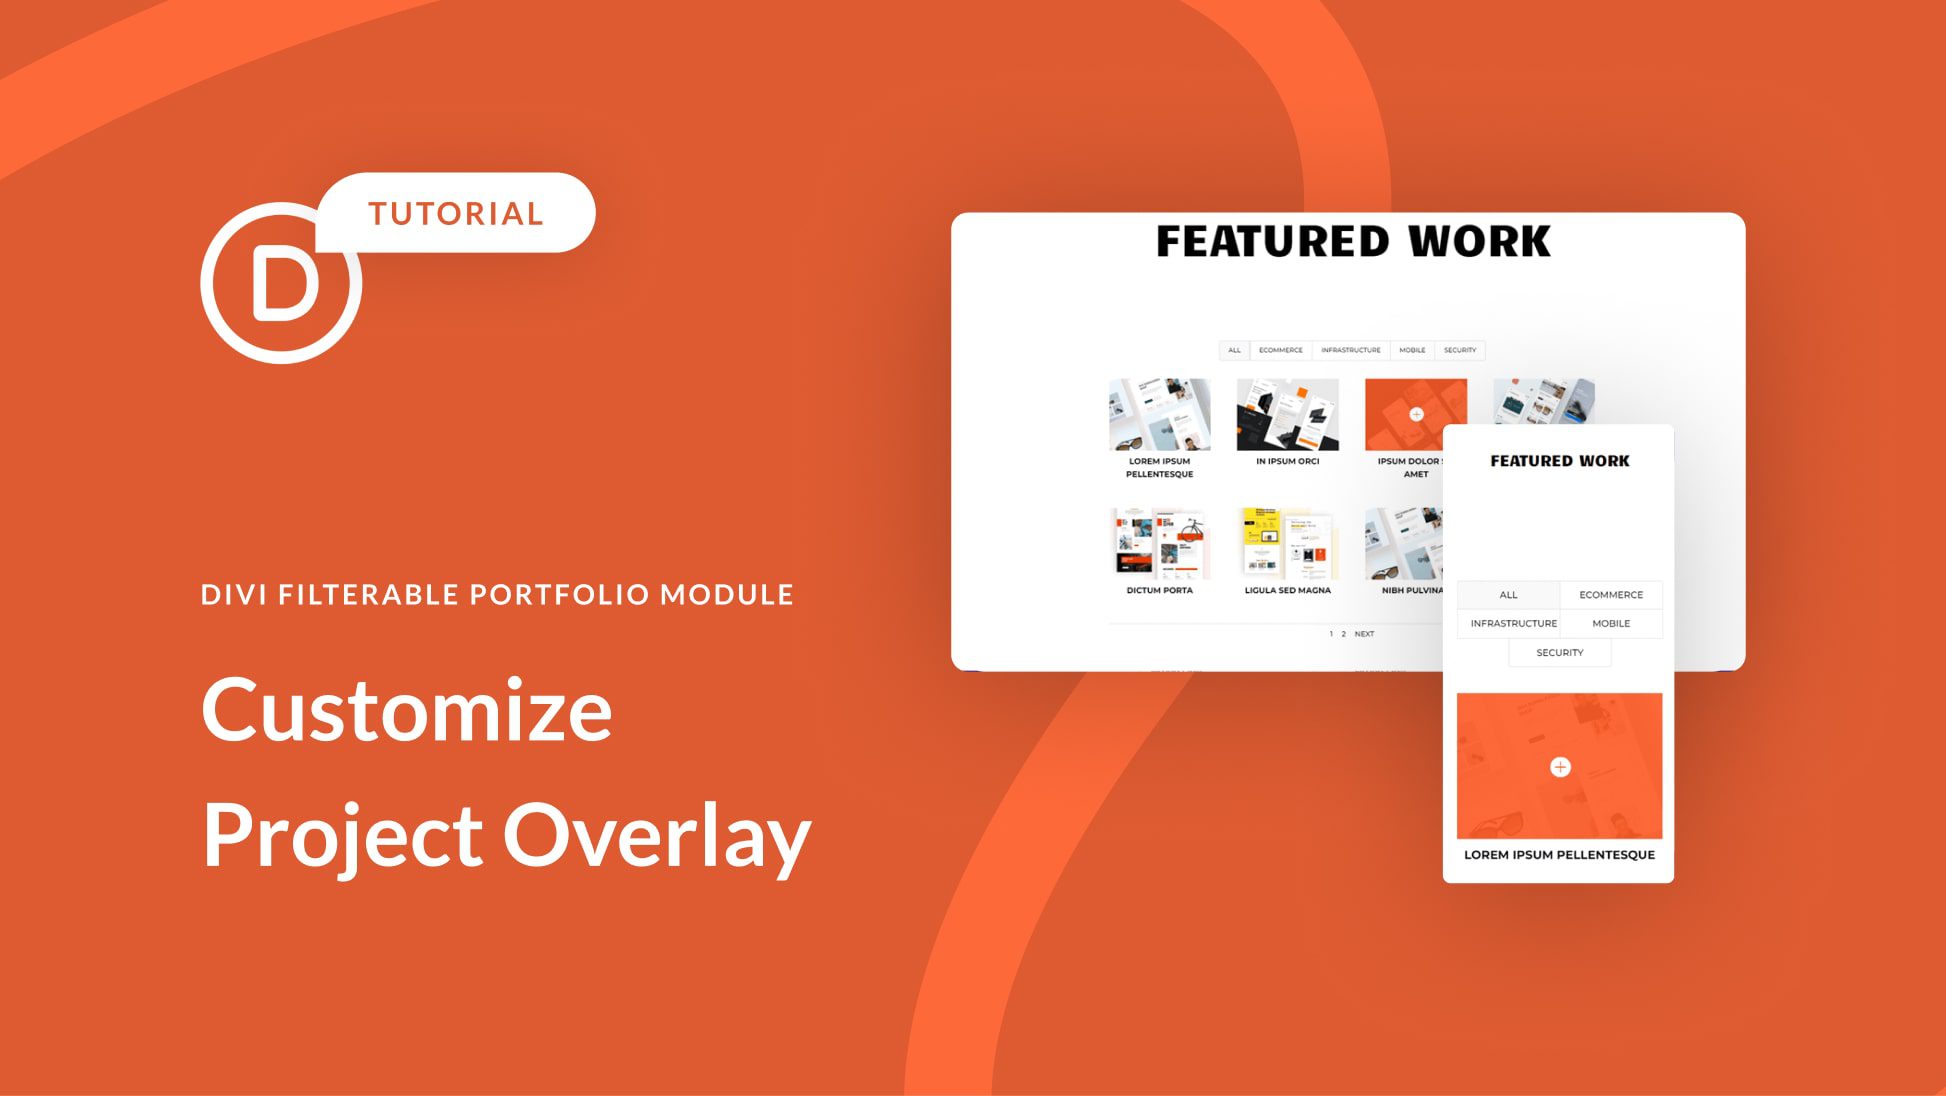 How to Customize the Project Overlay in Divi’s Filterable Portfolio Module